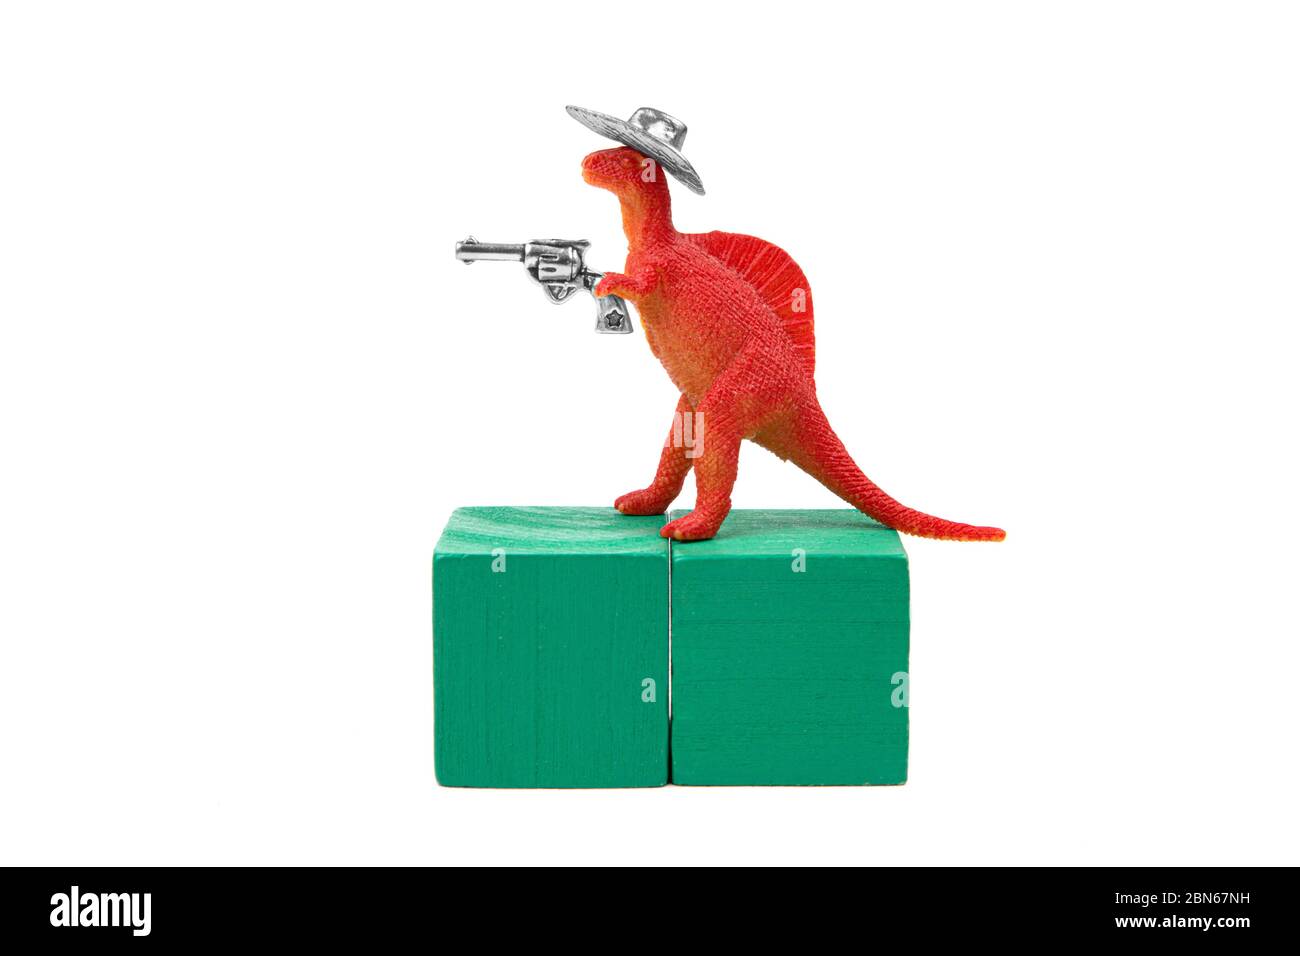 Toy tyrannosaurus rex wearing a cowboy hat and holding a revolver in his arm stands on two green wooden blocks. Close-up shot, isolated on white. Stock Photo